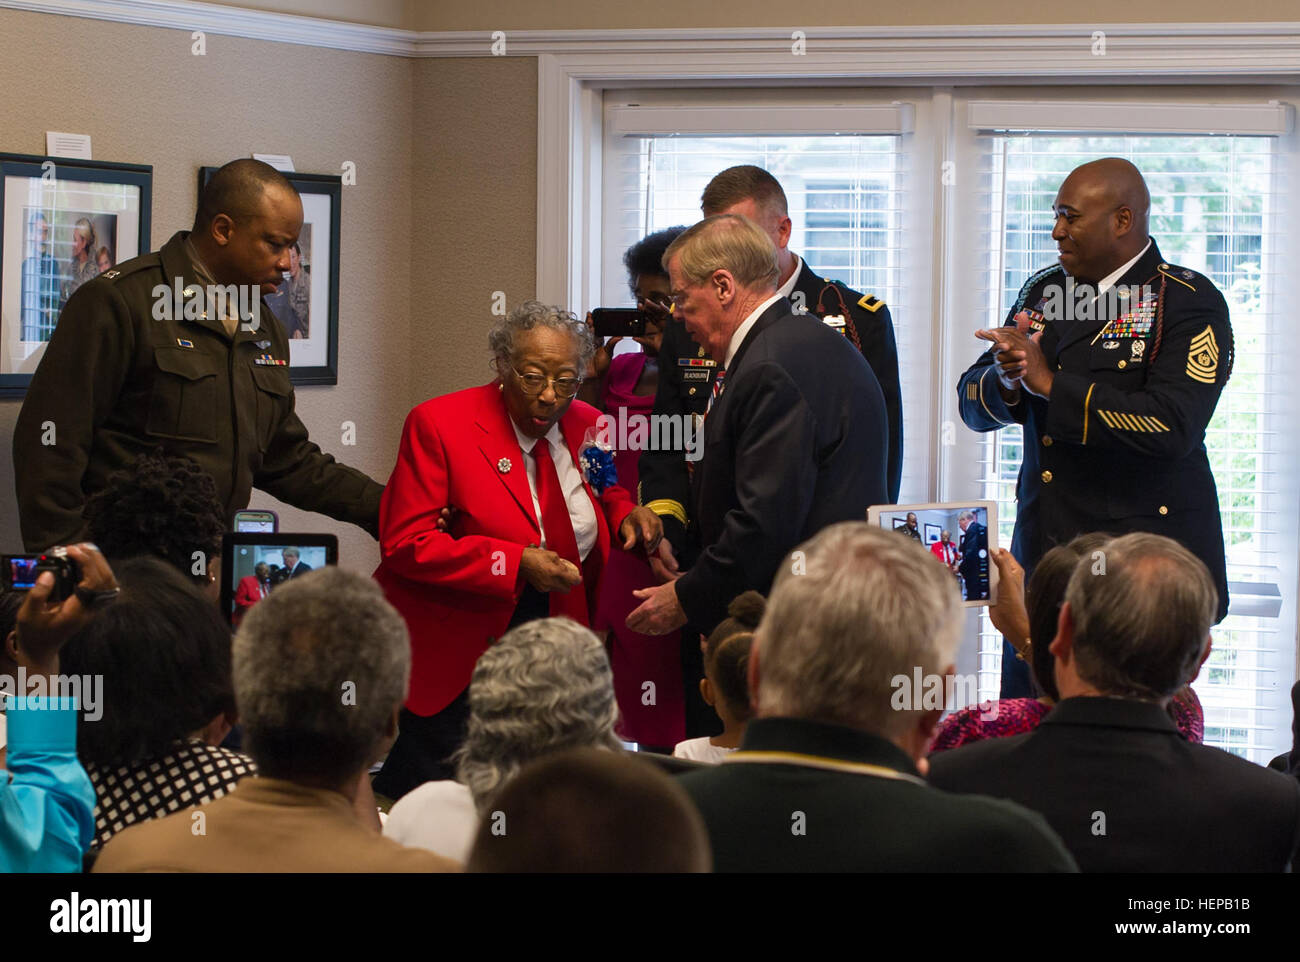 Sgt. Amelia Jones, a veteran of the original Tuskegee Airman, gets excited after receiving a bronze replica of the Congressional Gold Medal at Hospice Savannah, April 19. All in attendance gathered to witness the 95-year-old veteran receive the replica. The Actual Congressional Gold Medal is one of the two highest civilian awards in the United States. The replica was presented to her by U.S. Sen. Johnny Isakson, R-Ga., along with Brig. Gen. James Blackburn and Command Sgt. Maj. Stanley Varner, command team for Task Force Marne, 3rd Infantry Division. The Congressional Gold Medal was awarded to Stock Photo